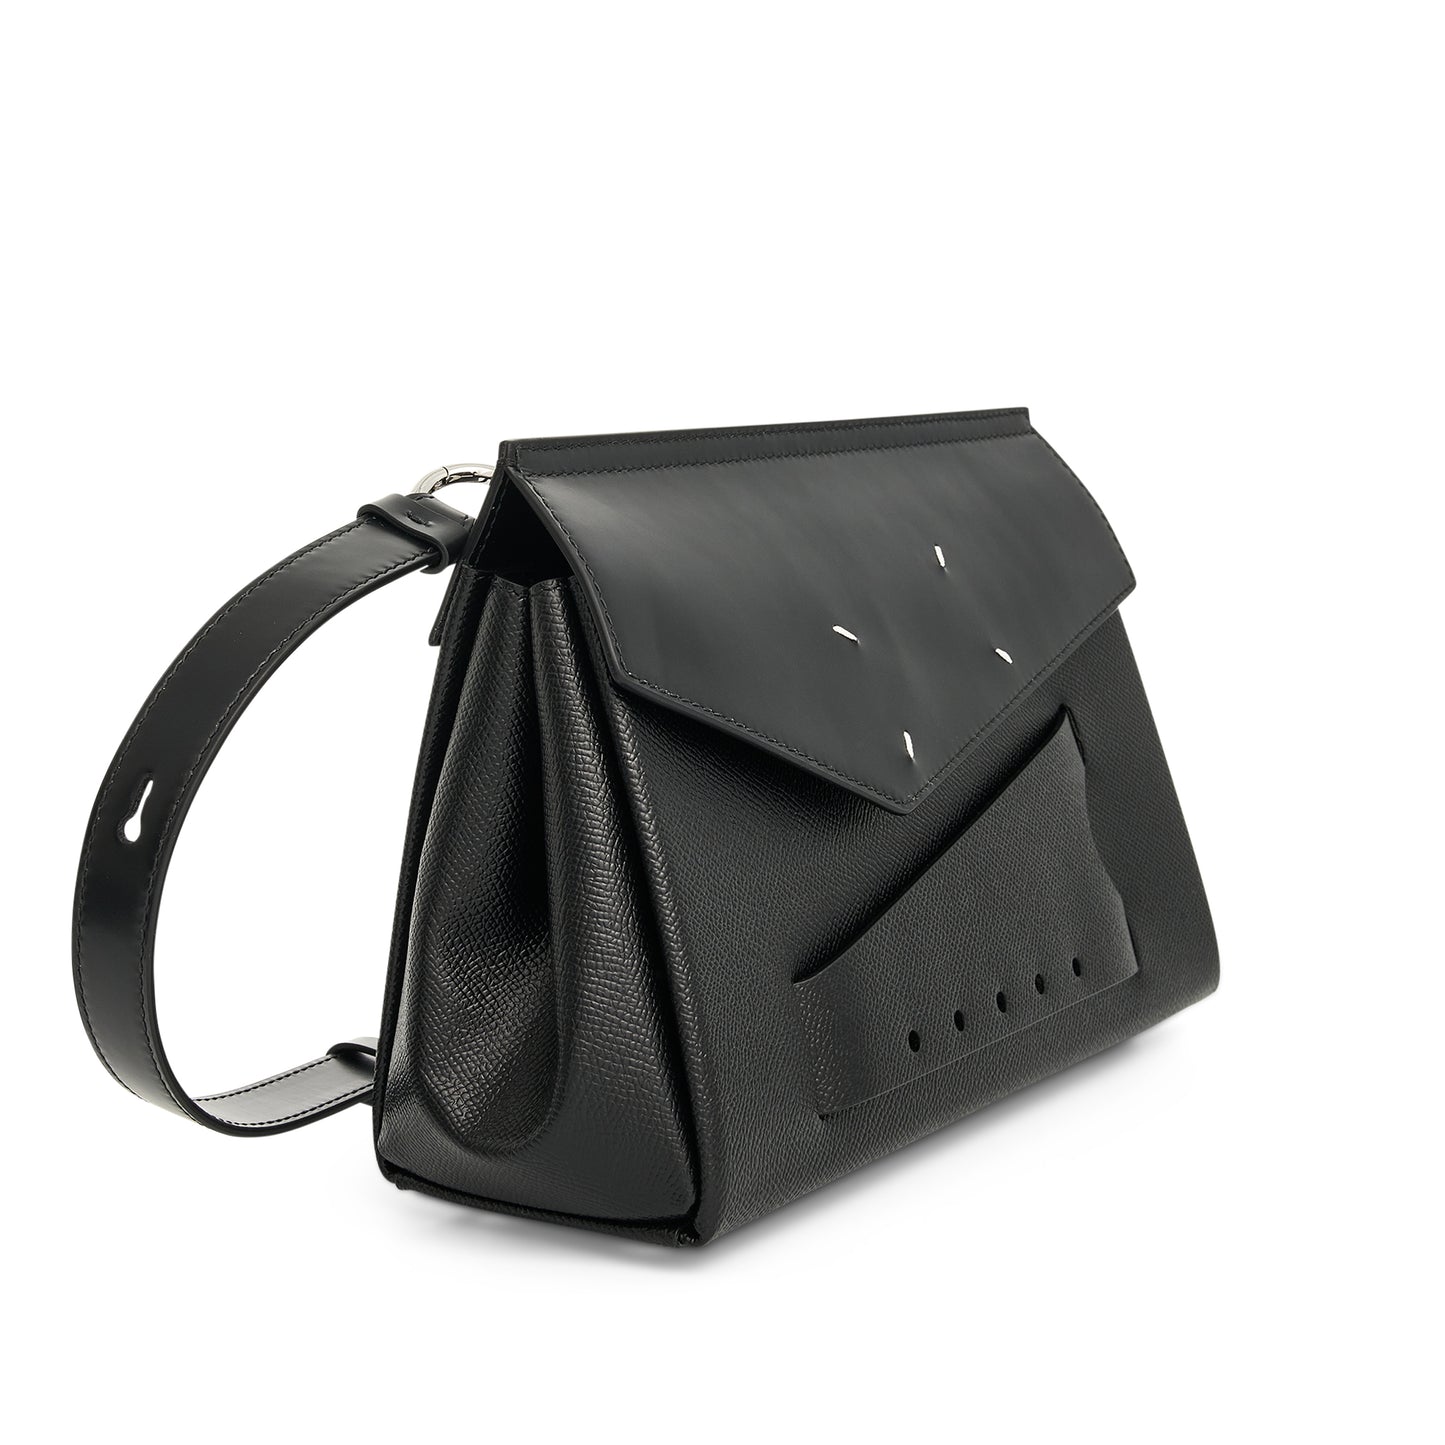 Snatched Leather Tote Bag in Black